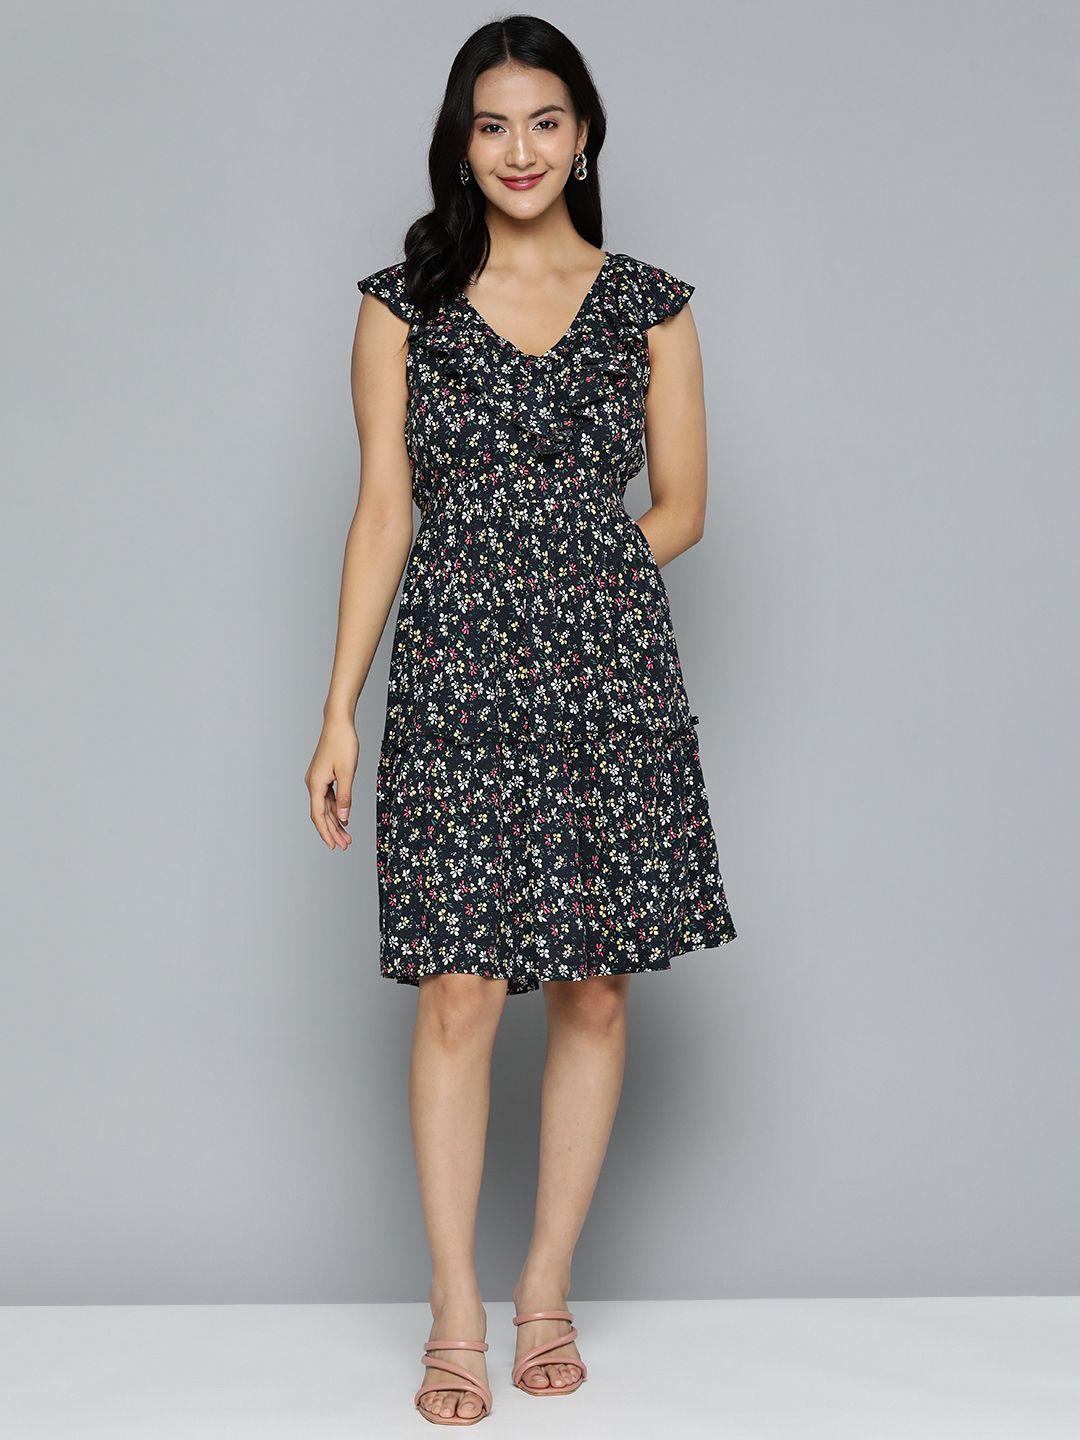 here&now black & white floral crepe a-line dress